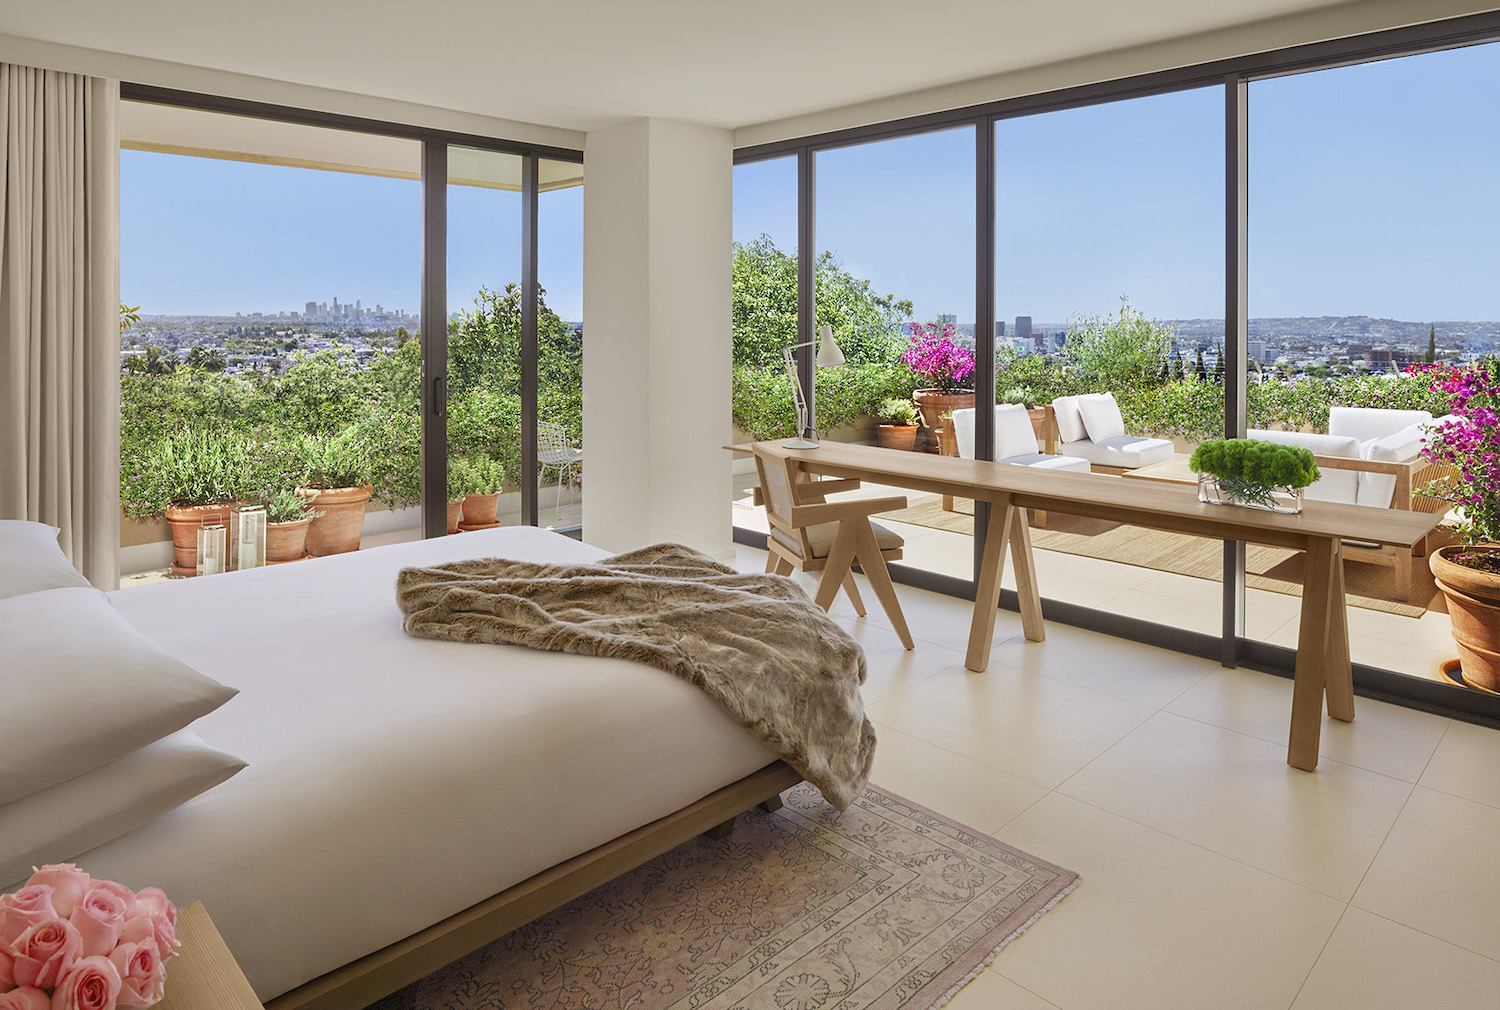 White bed in a room with floor-to-ceiling windows overlooking greenery and a terrace with a seating area that overlooks the city